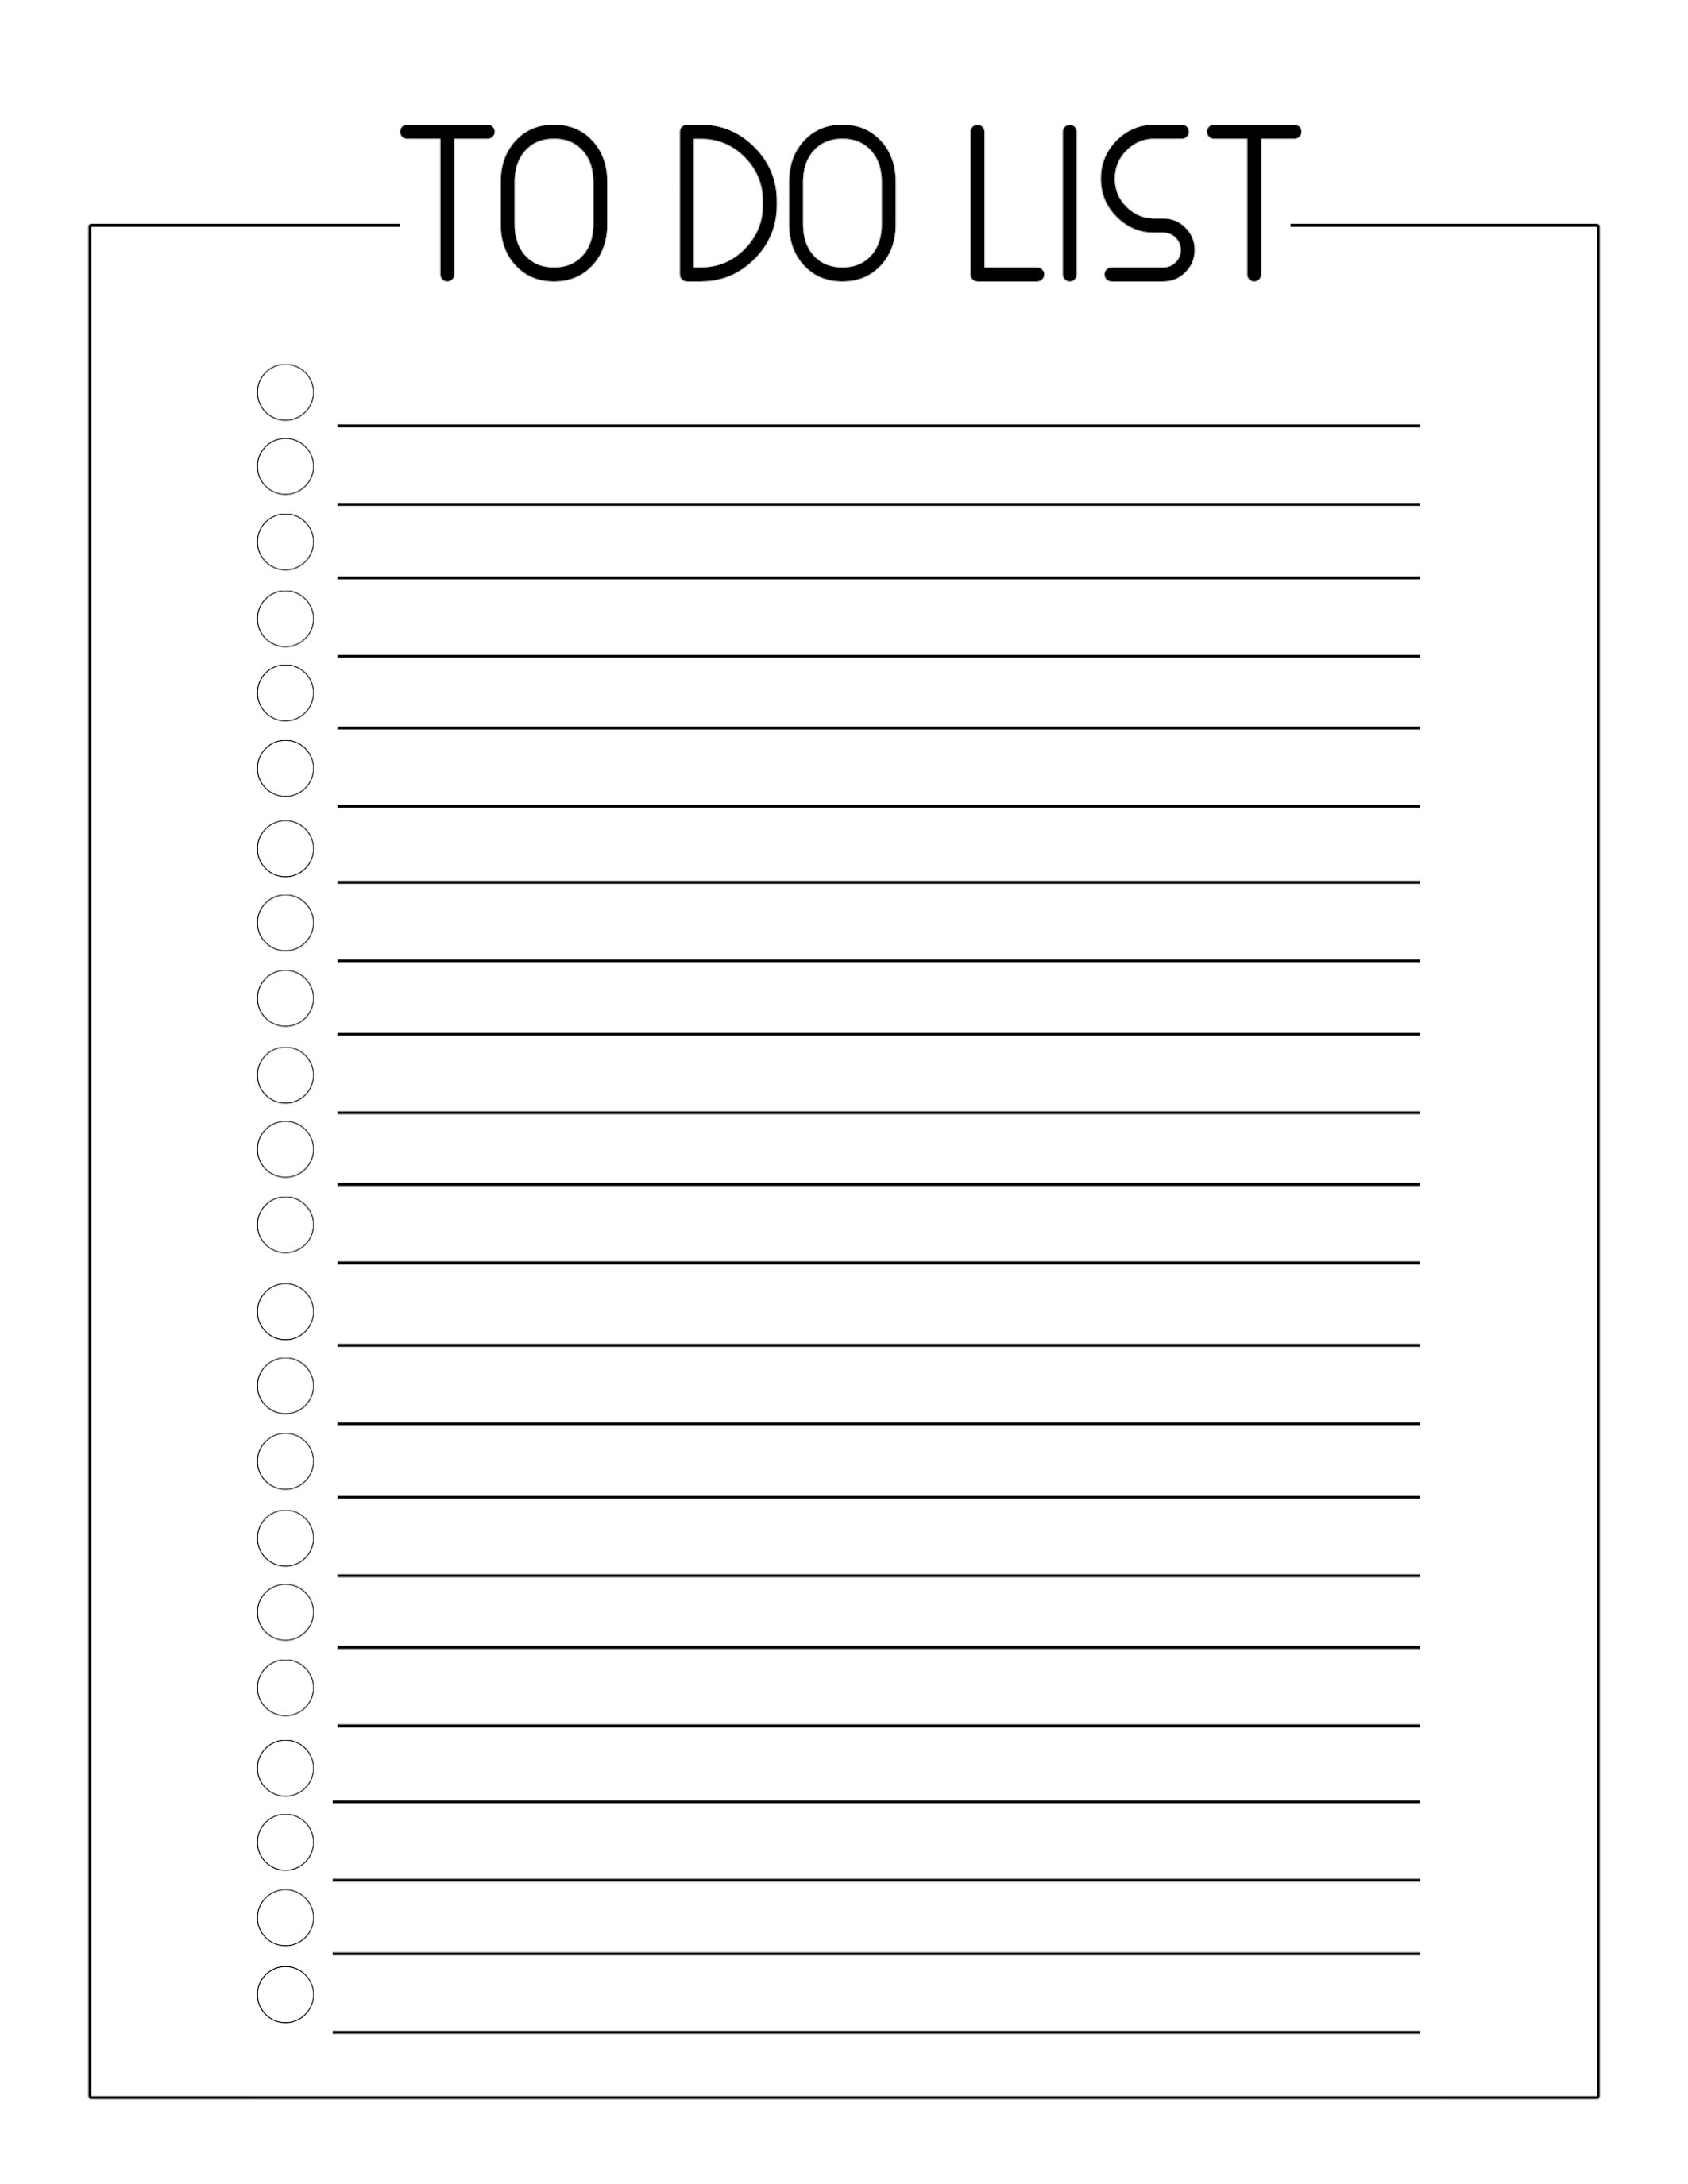 Free Printable To Do Checklist Template - Paper Trail Design - Free To Do List Template Printable